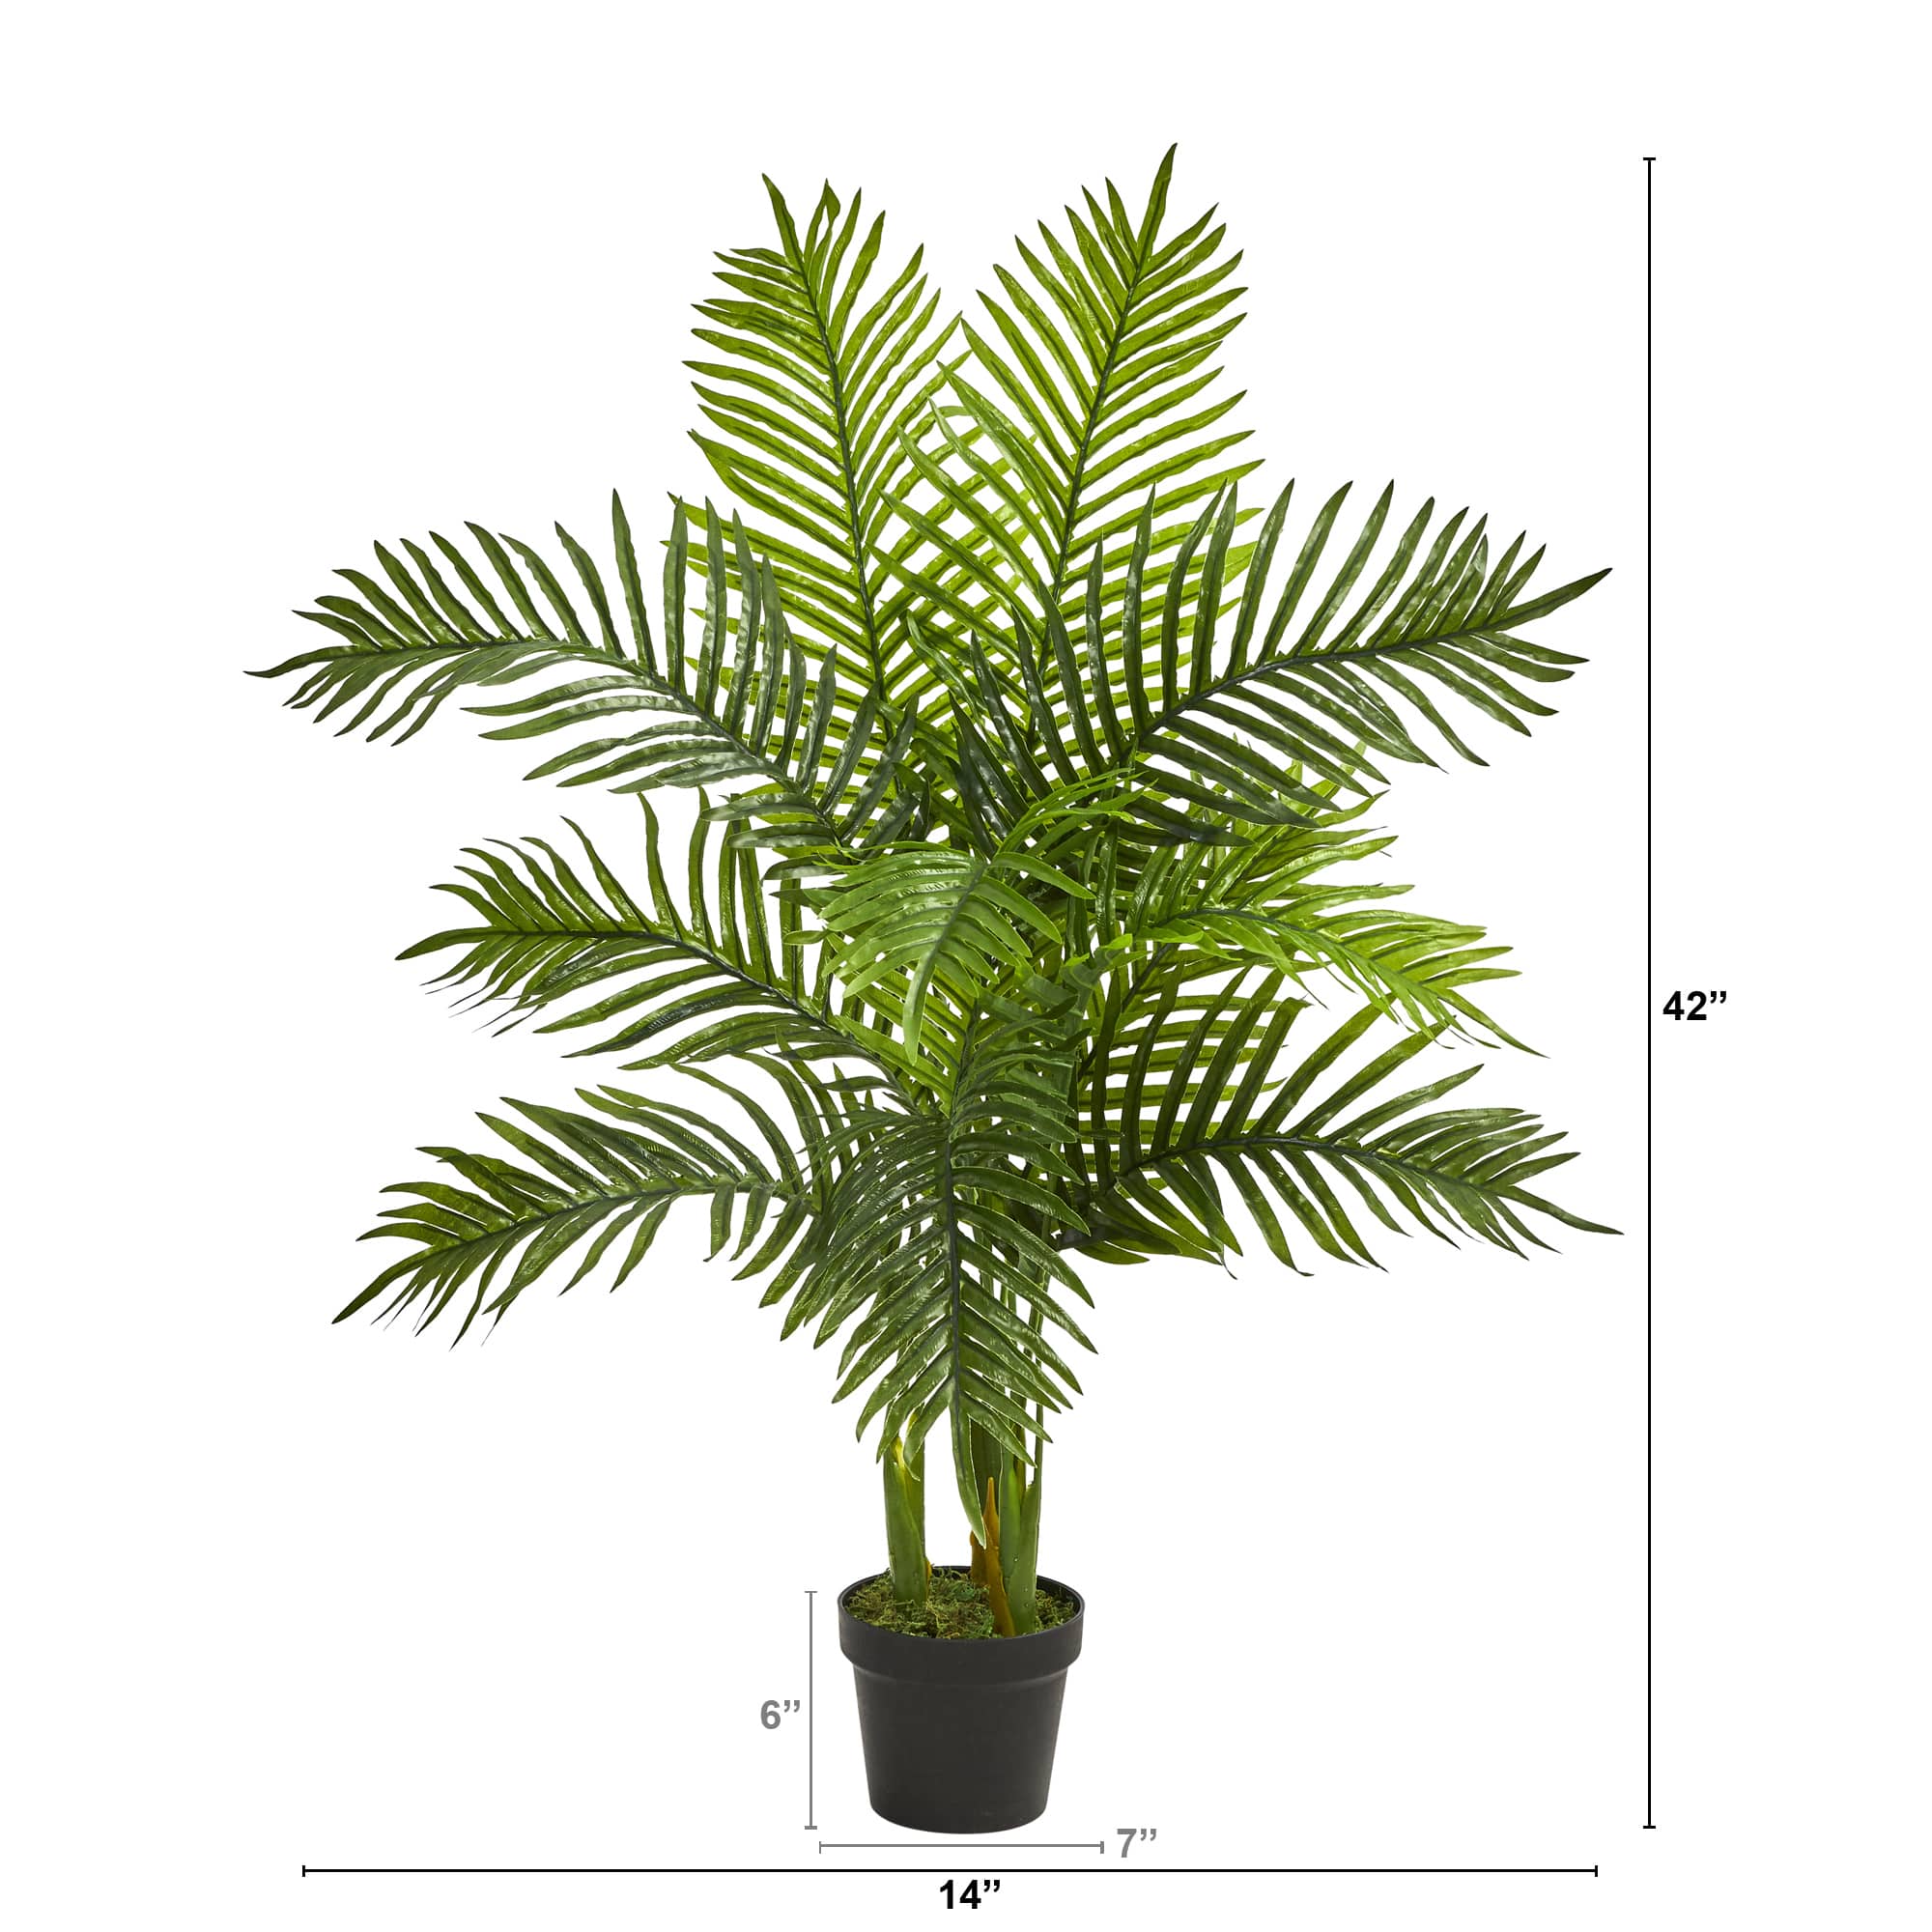 3.5ft. Potted Areca Palm Tree